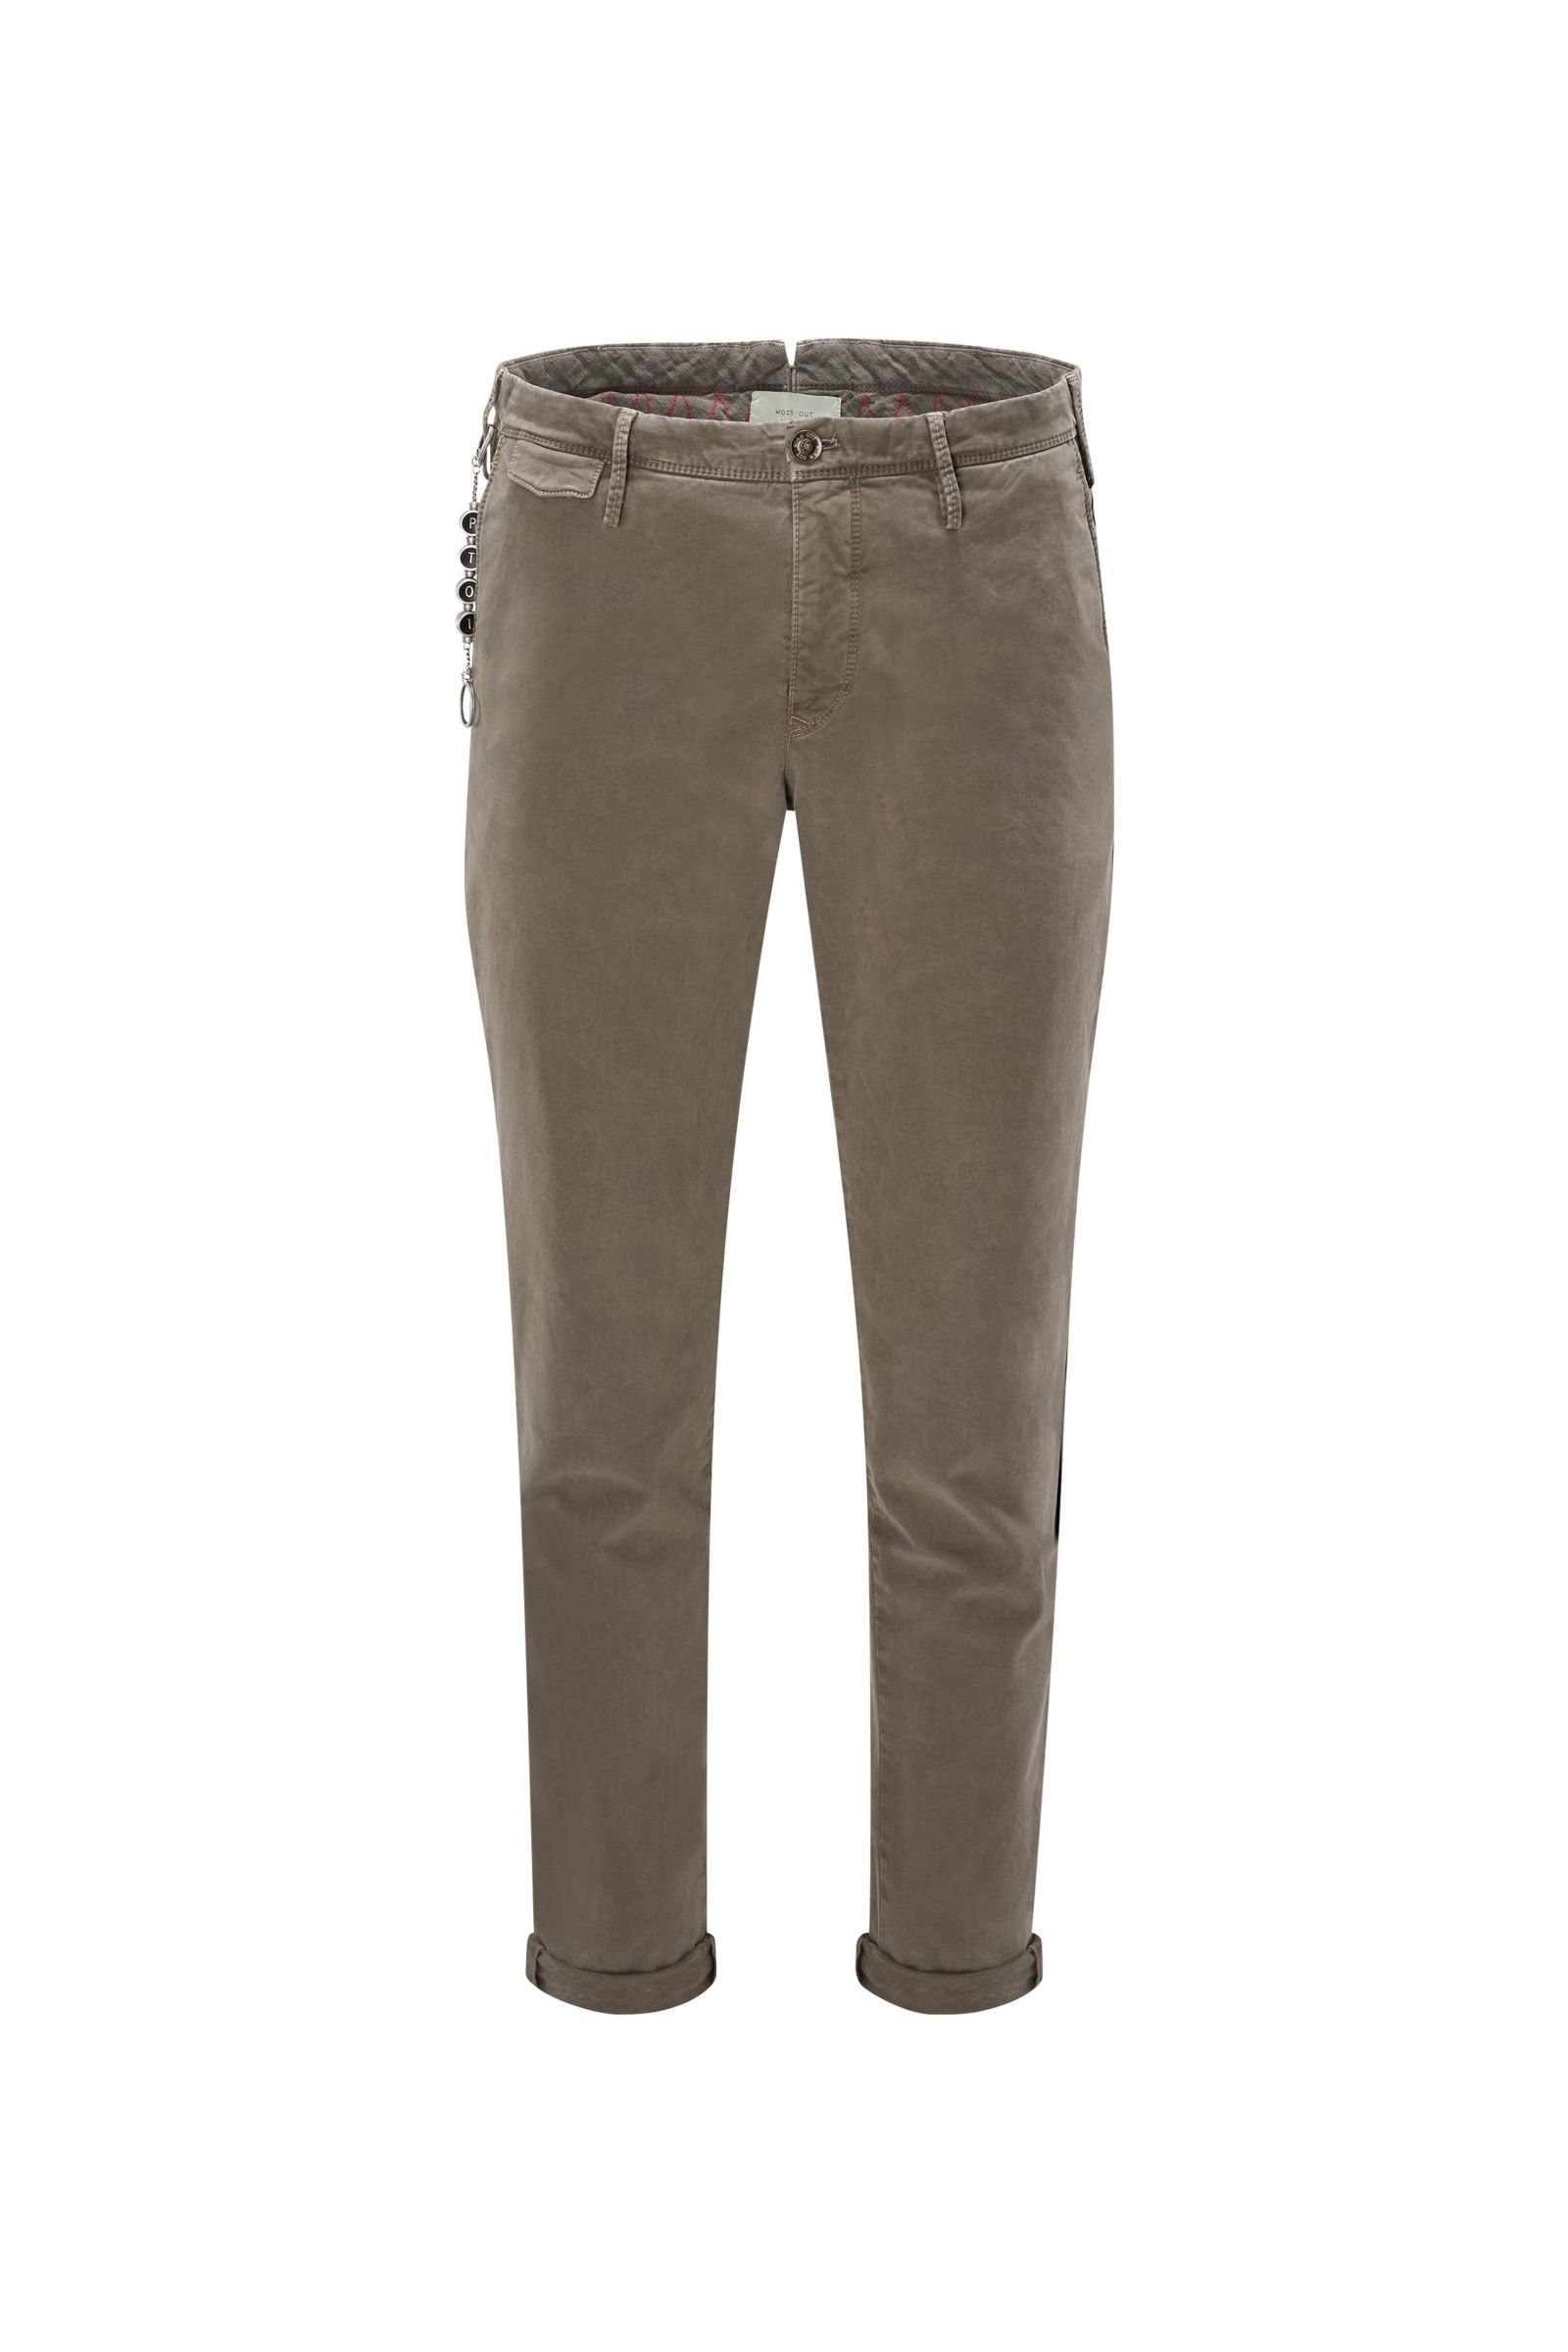 Cotton trousers 'Worn out Elegance' grey-brown